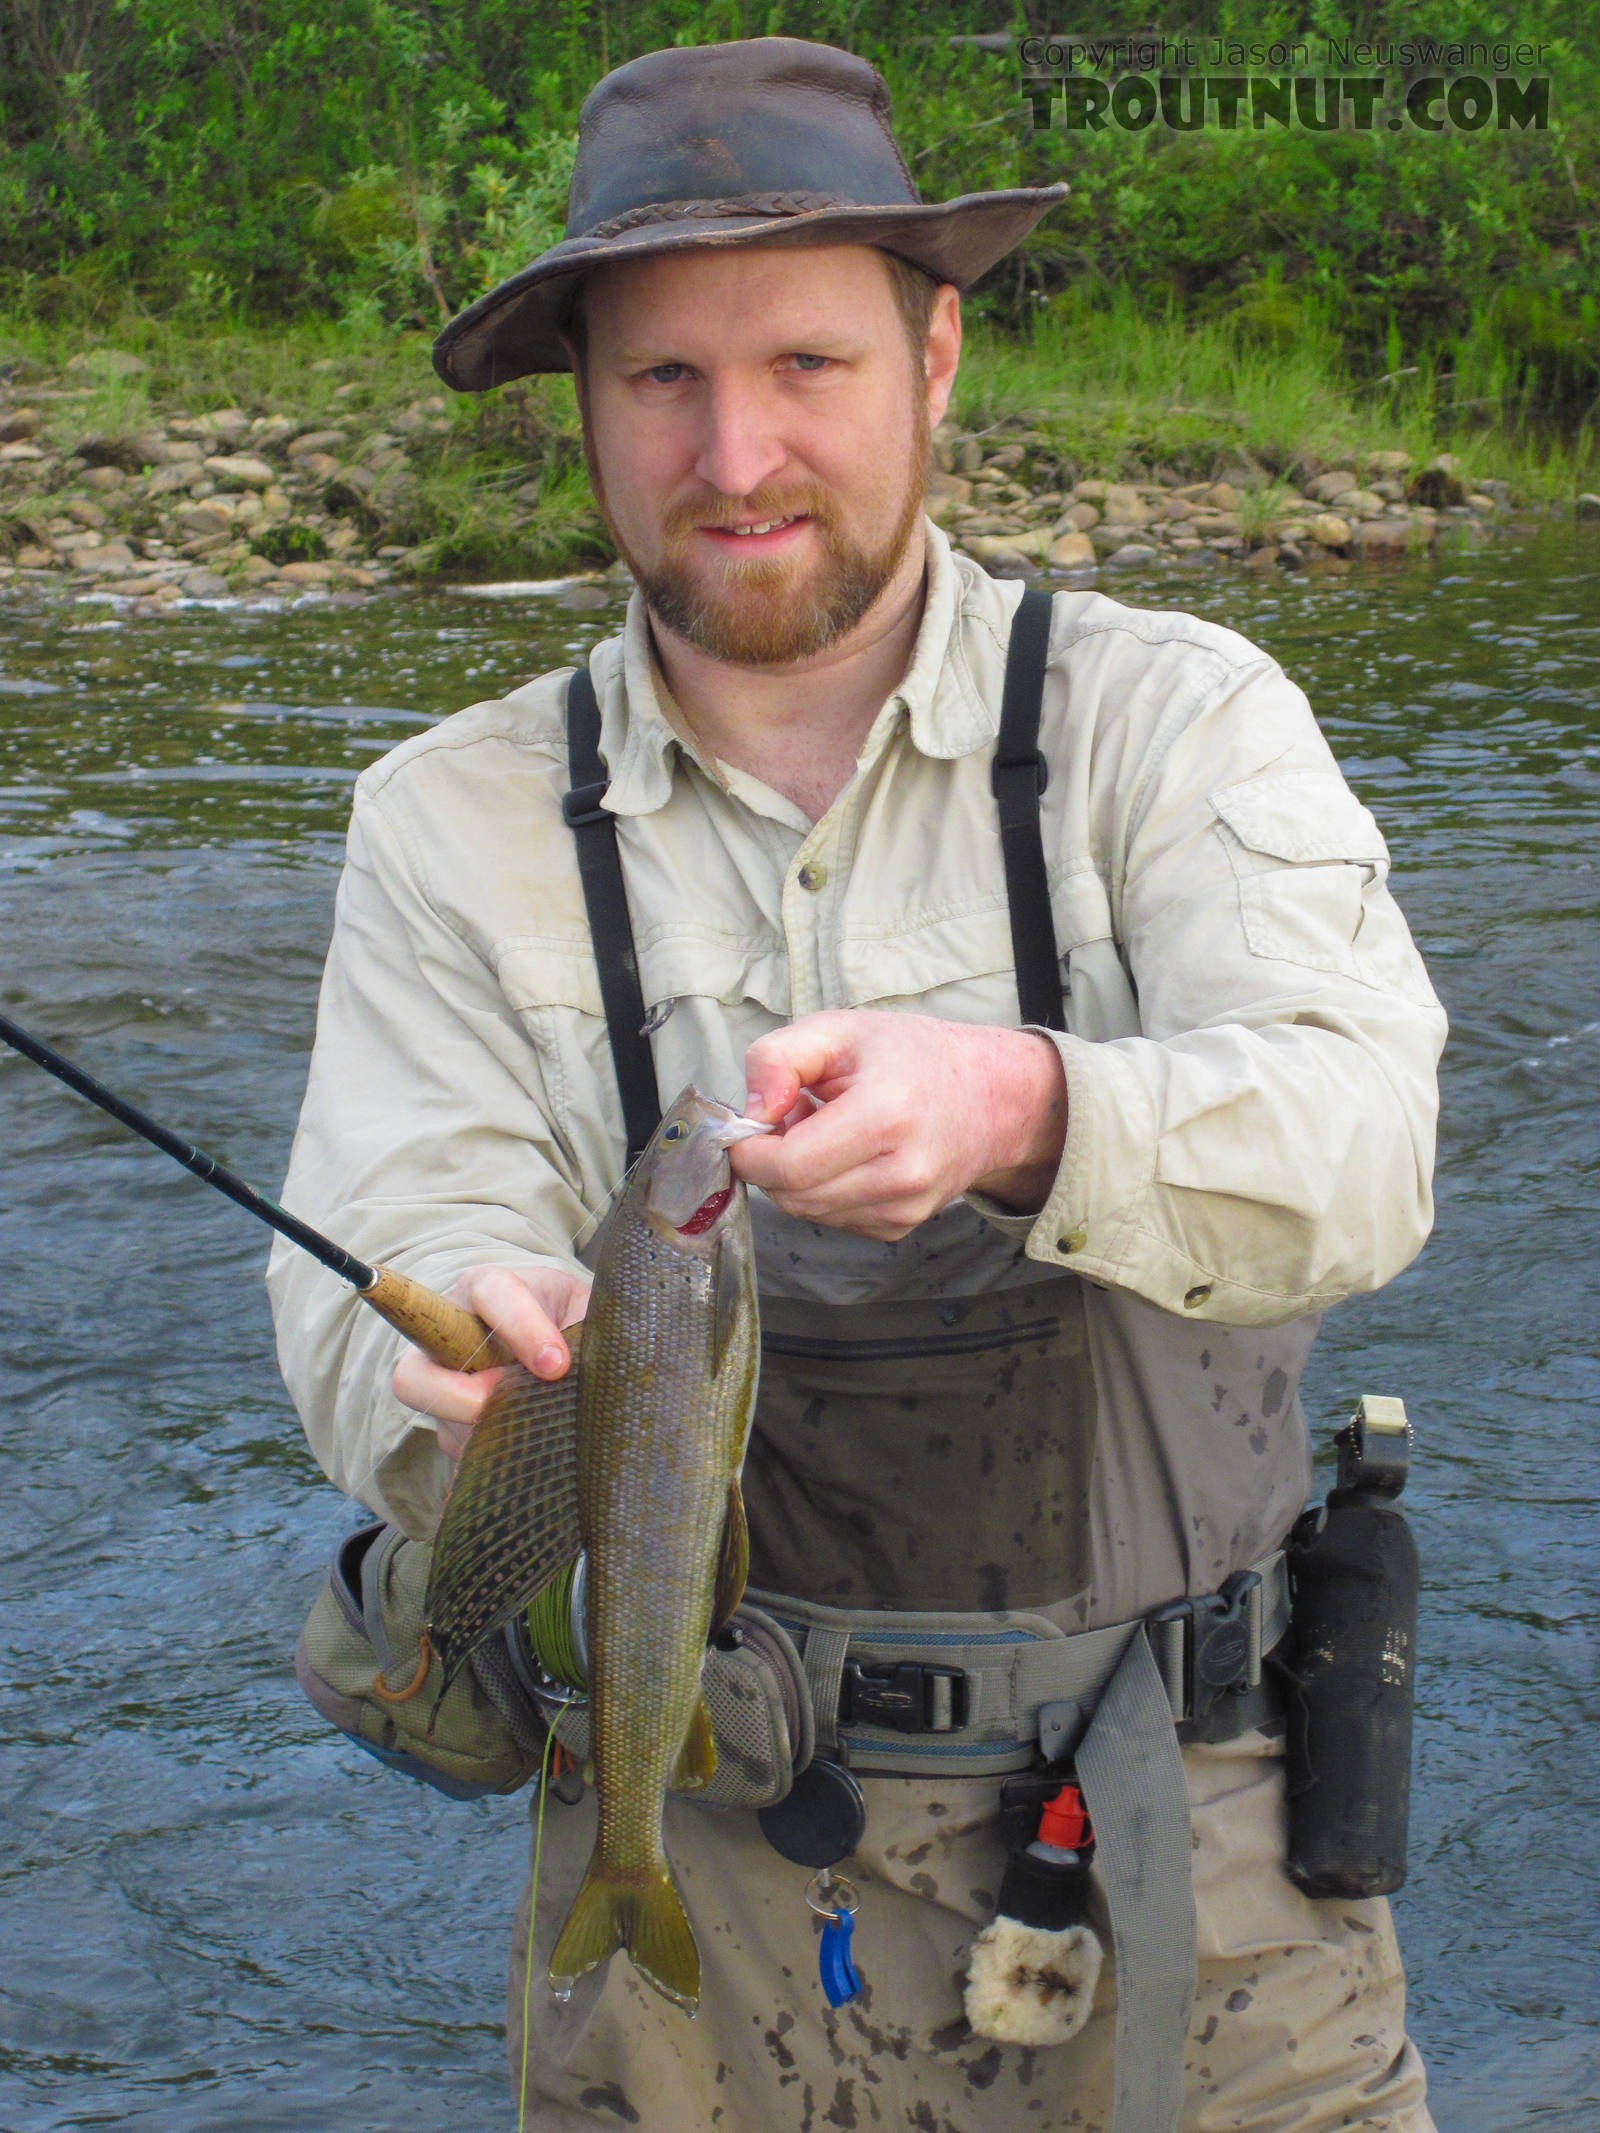 My first good-sized grayling of the year, and the biggest I've seen in this creek, about 15-16 inches. From Nome Creek in Alaska.